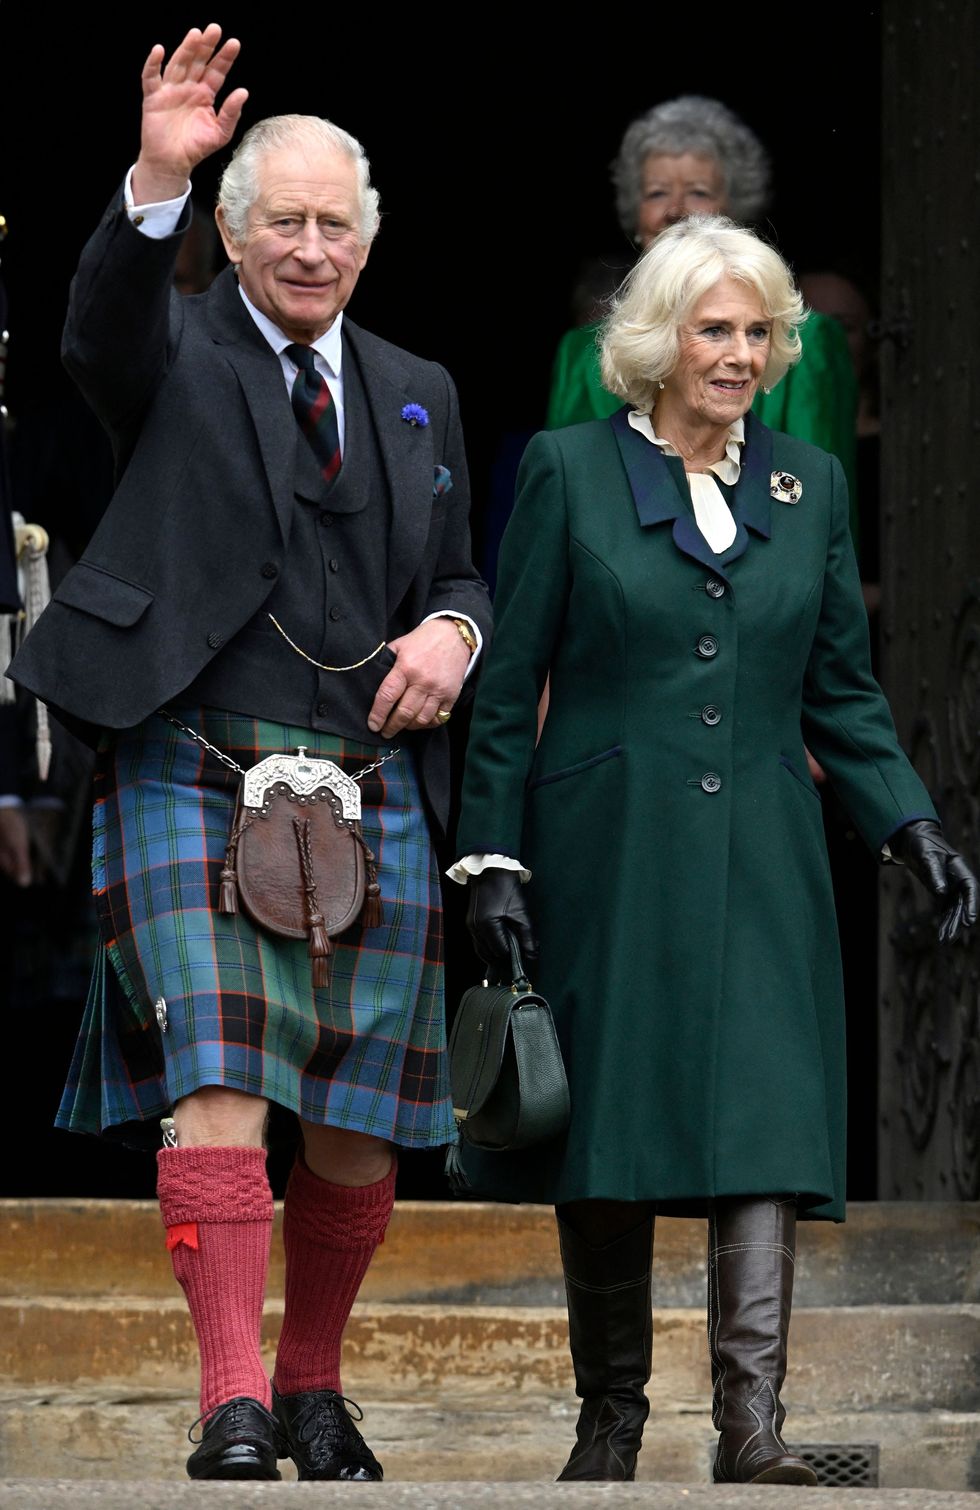 britains king charles iii and britains camilla, queen consort wave as they walk to meet members of the public after leaving from city chambers to dunfermline abbey in dunfermline in south east scotland on october 3, 2022 photo by neil hanna  afp photo by neil hannaafp via getty images